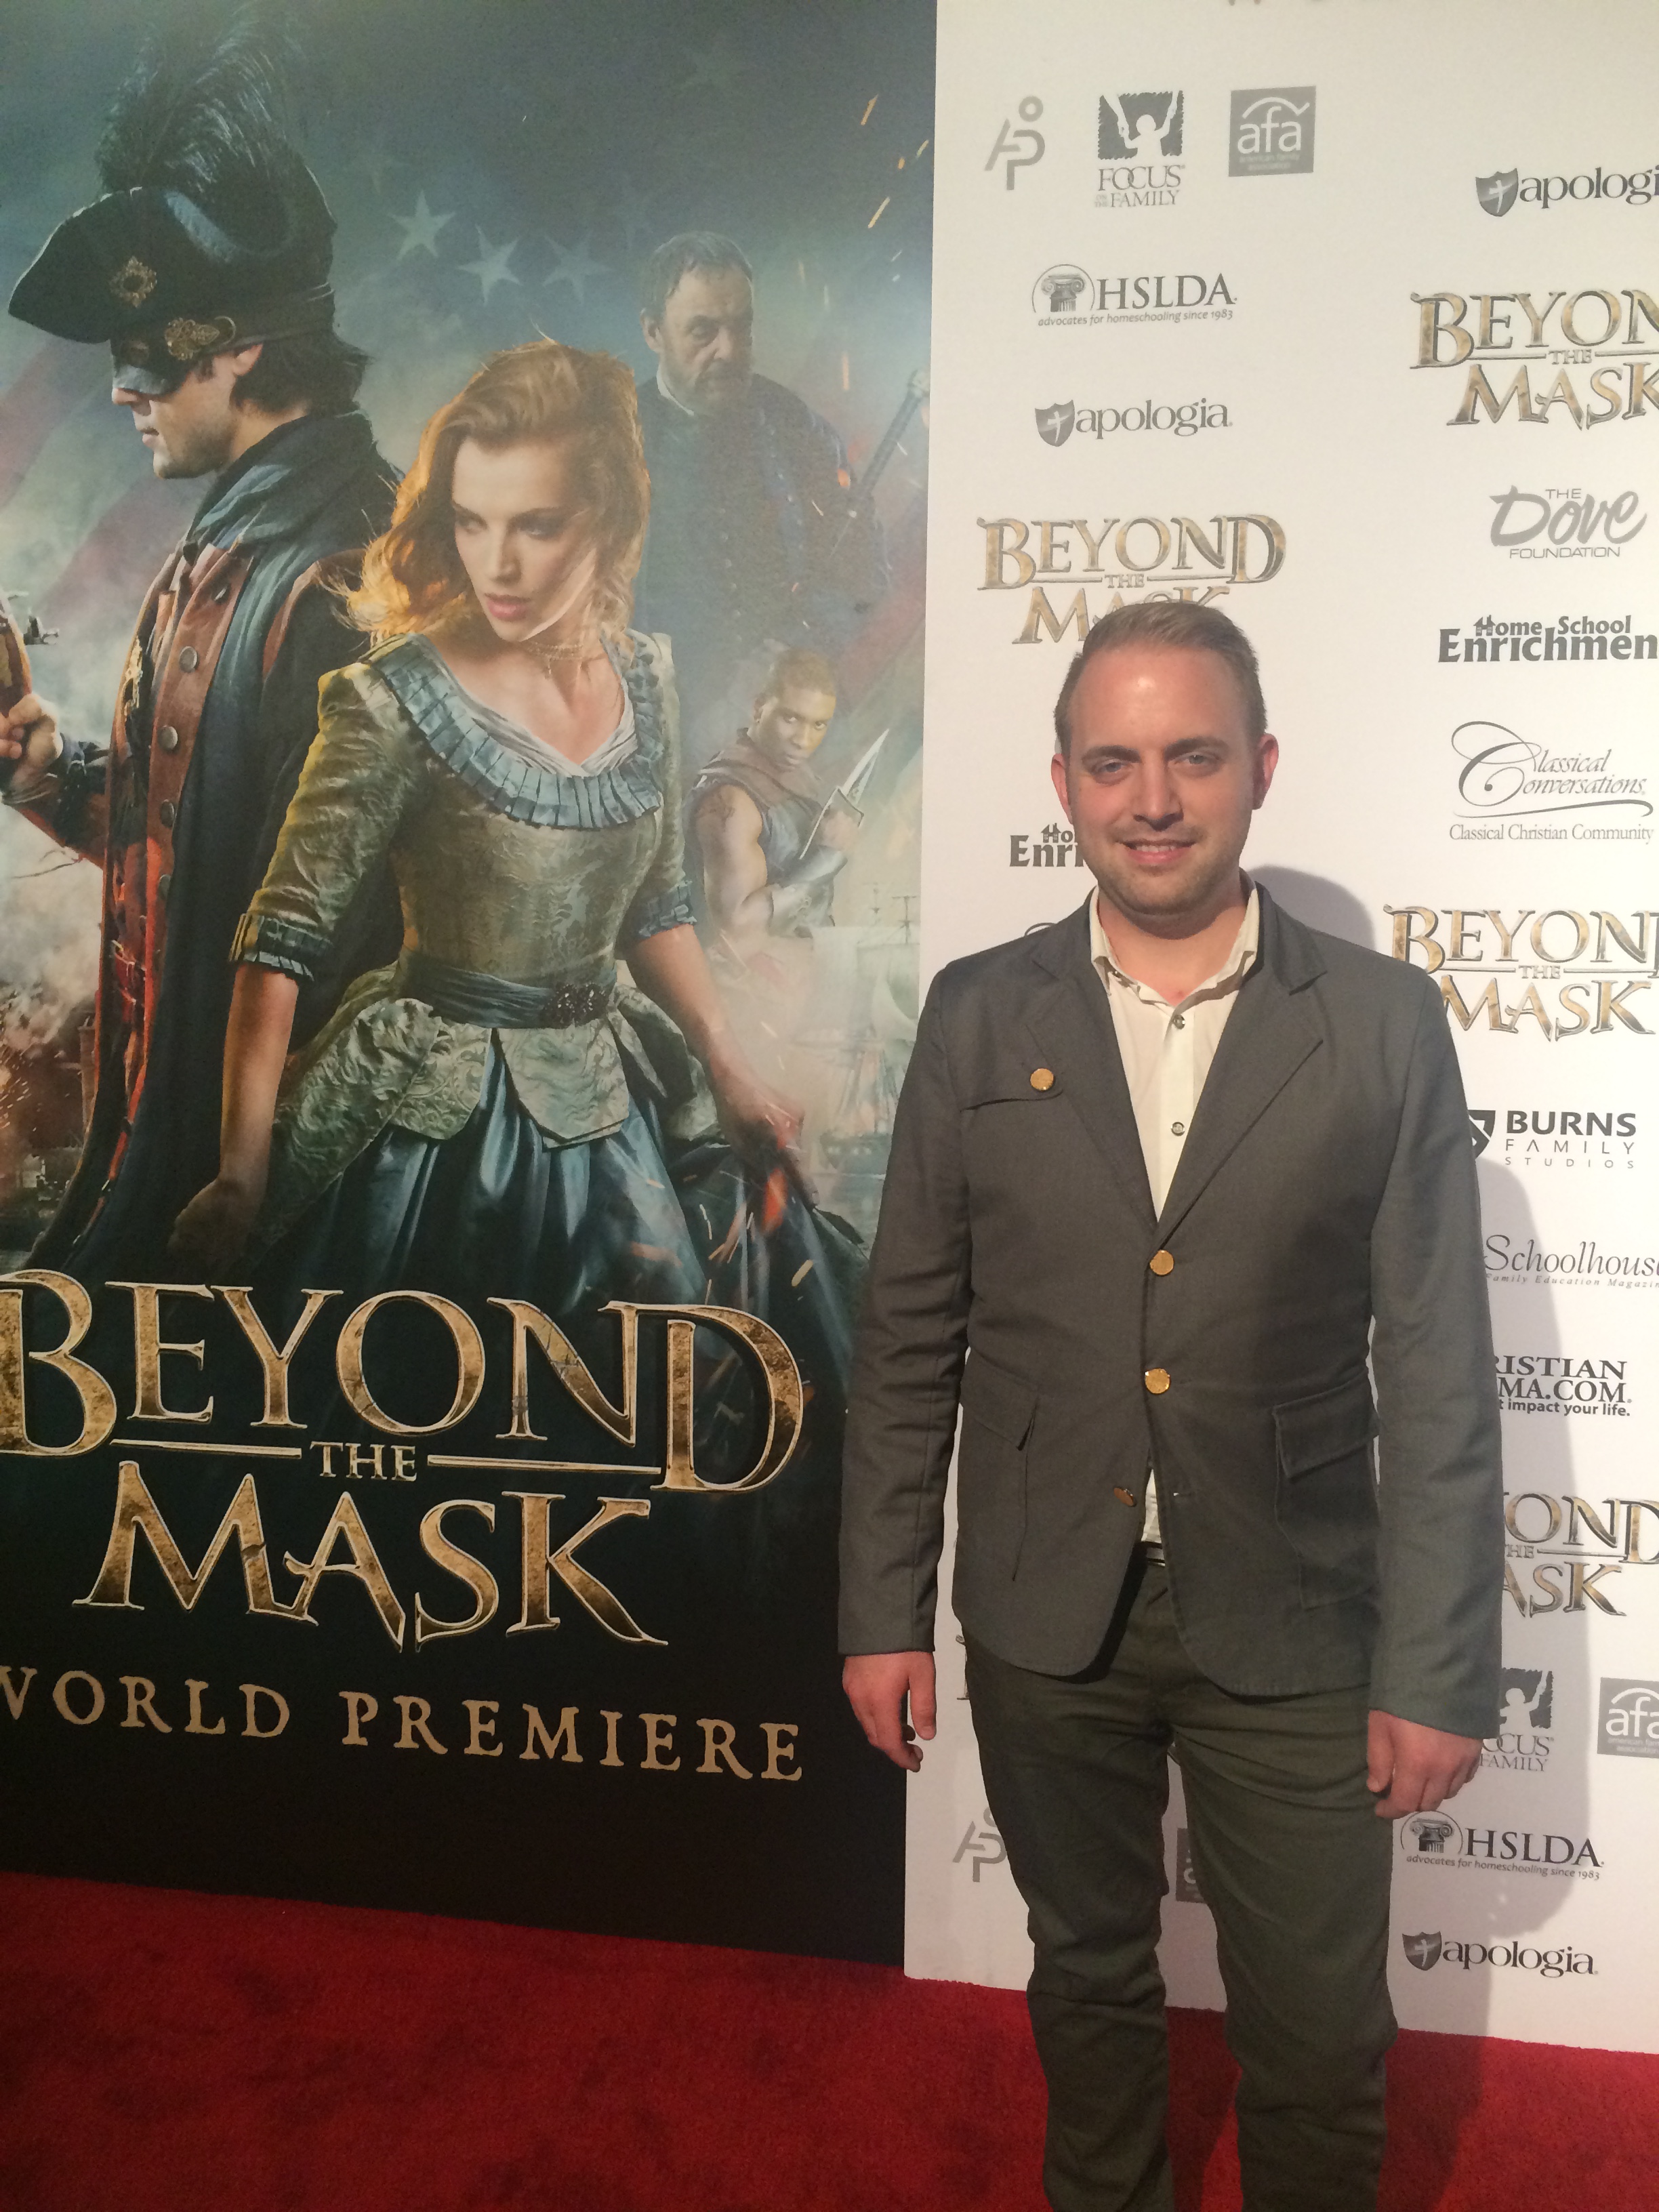 The World Premiere of Beyond The Mask.